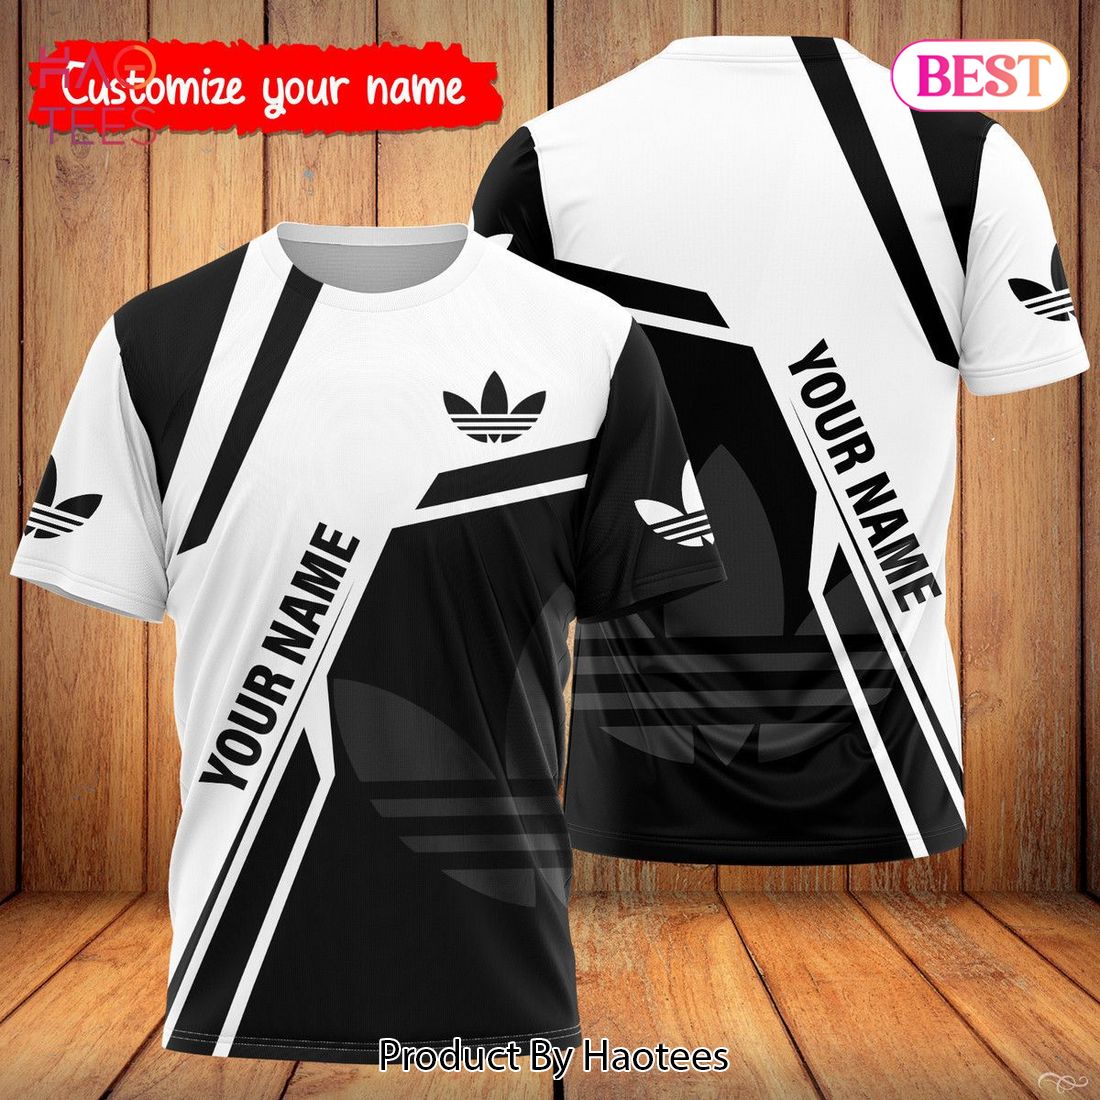 THE BEST Adidas Customize Name 3D T-Shirt Luxury Brand Limited Edition